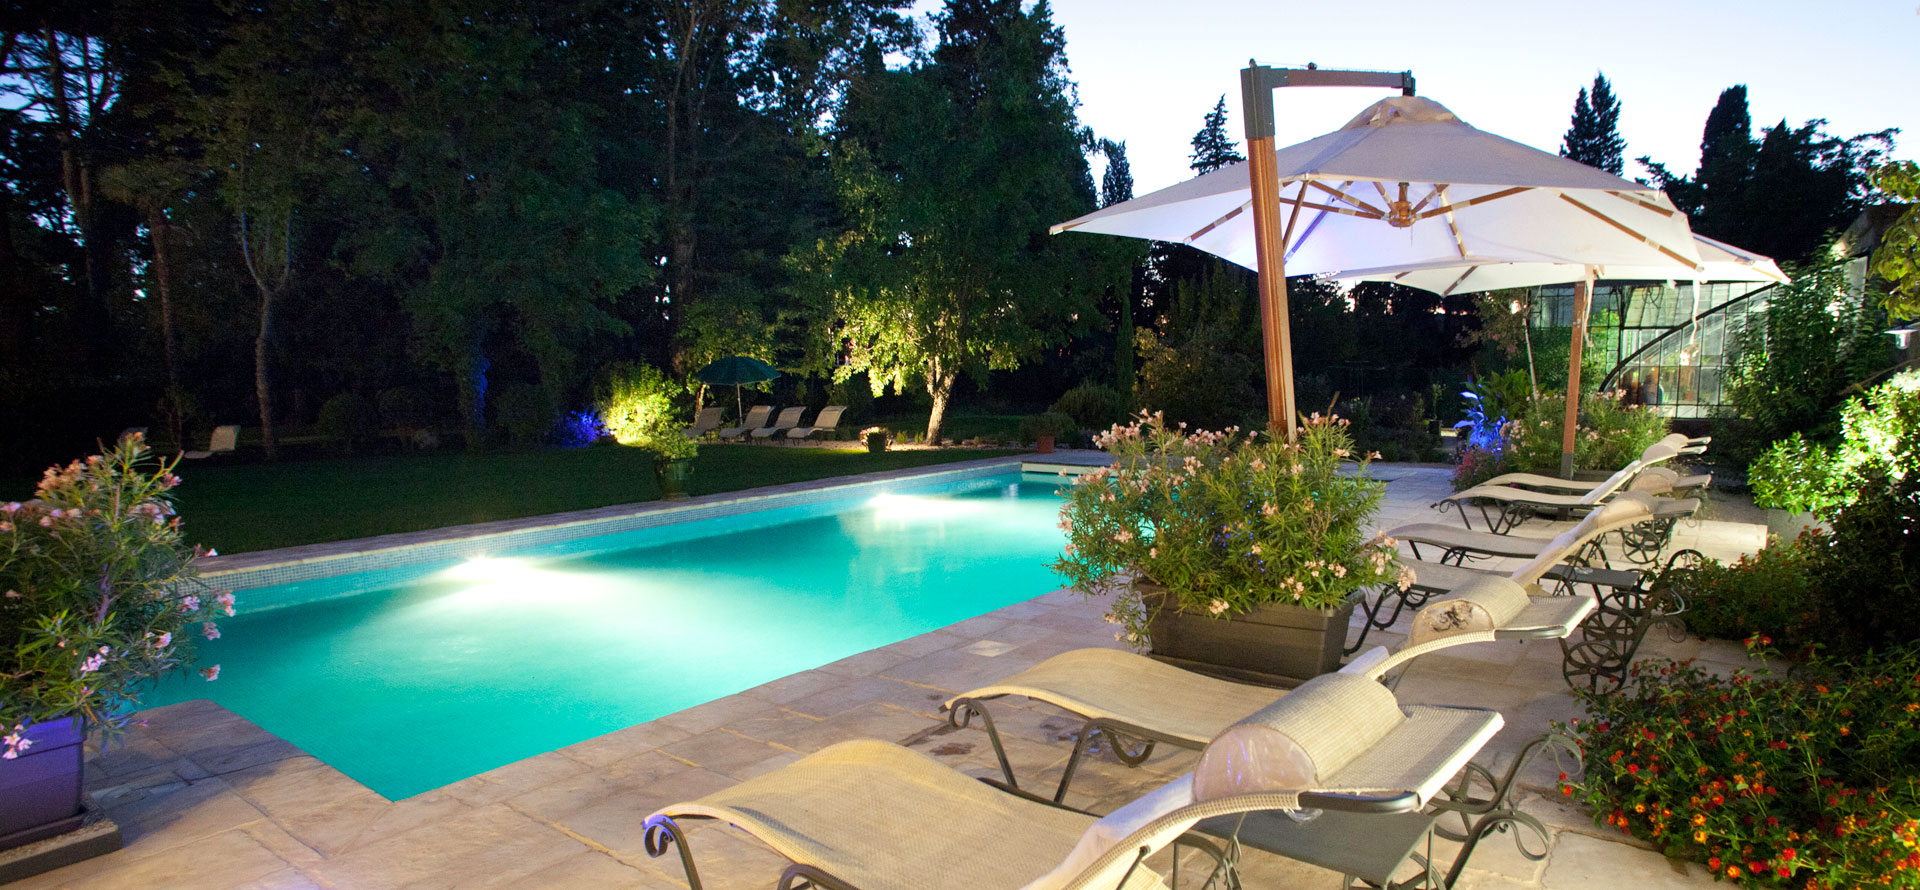 The gîte private pool at night time in Vernède Castle in Nissan-lez-Enserune